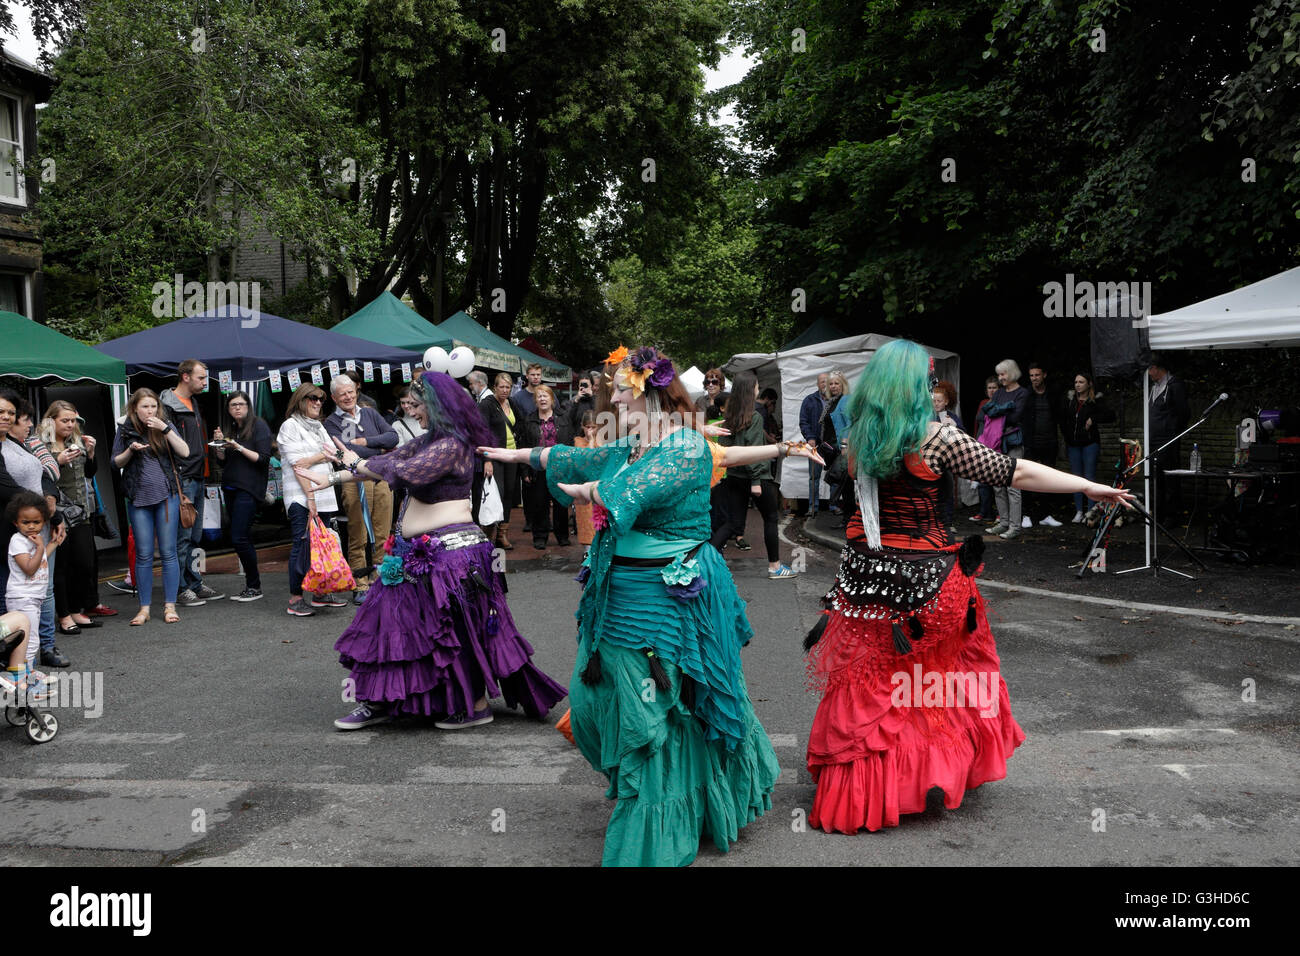 Boomshanka Belly dancers performing at the Nether Edge farmers market in Sheffield England June 2016 bellydancing belly dancing Stock Photo